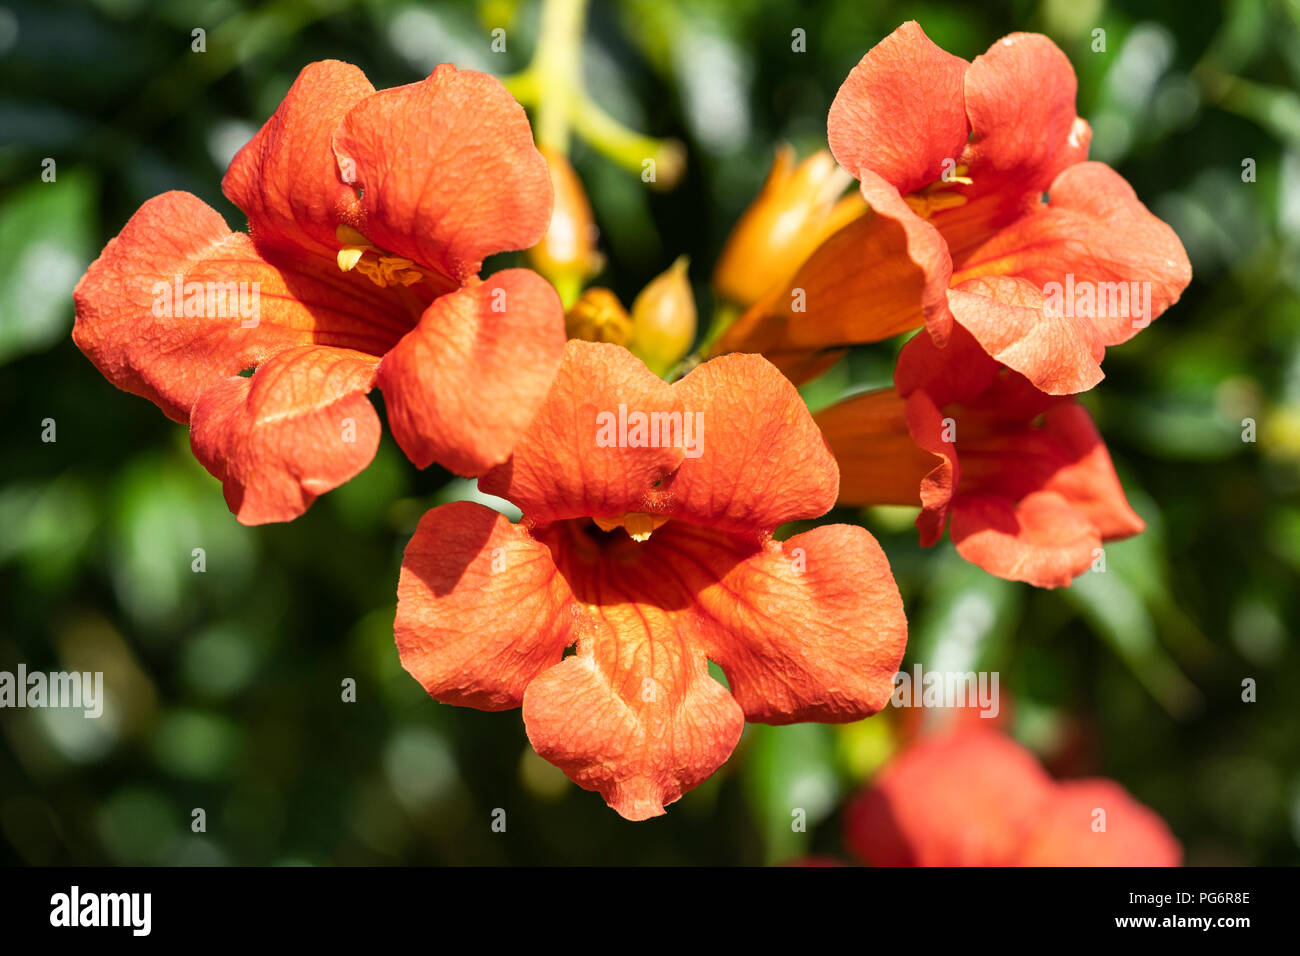 Chinese trumpet creeper stock image. Image of trumpet - 75938331